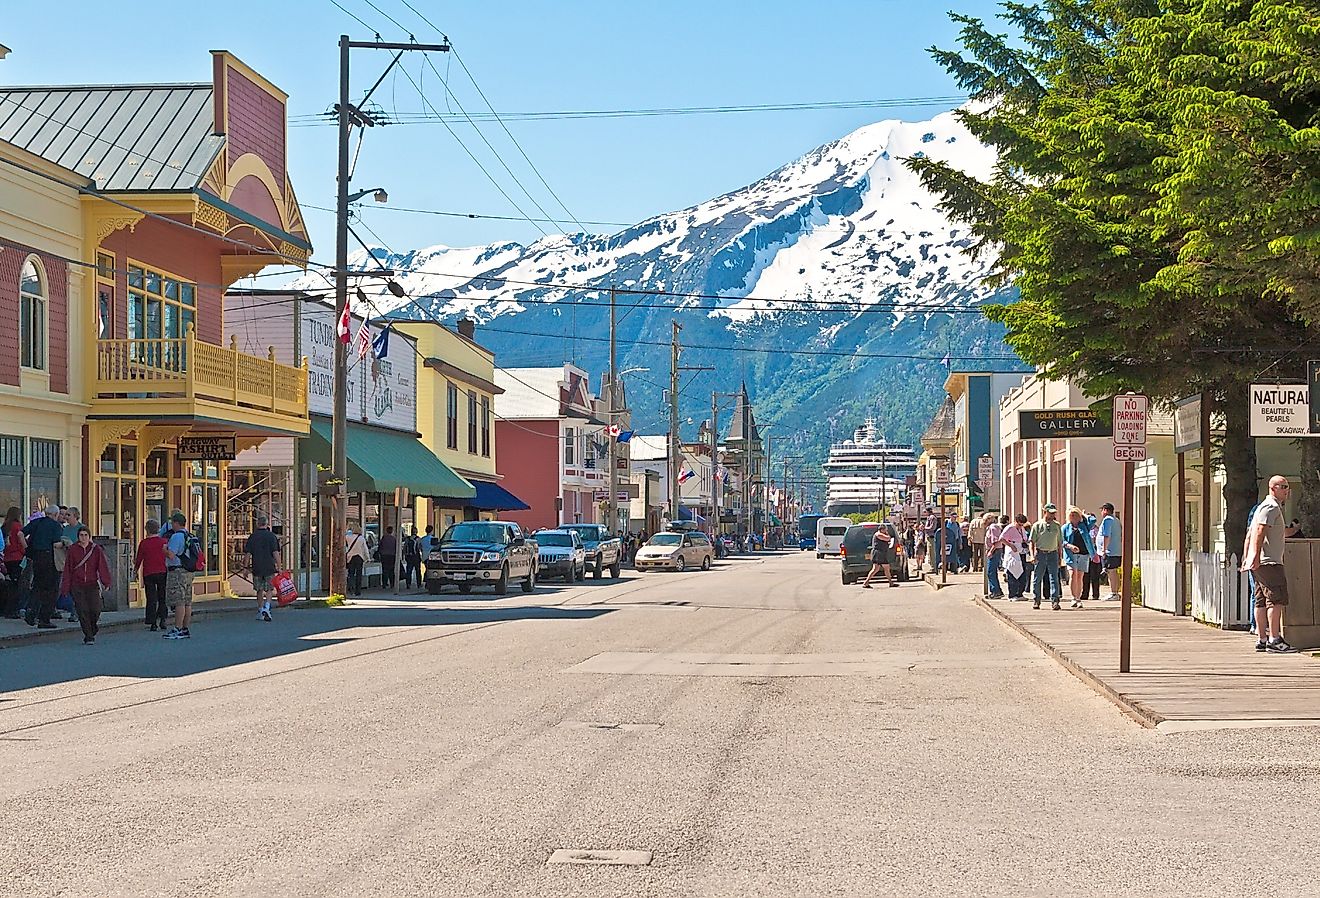 Main shopping district in the small town of Skagway, Alaska during the summer months. Image credit Ruth Peterkin via Shutterstock